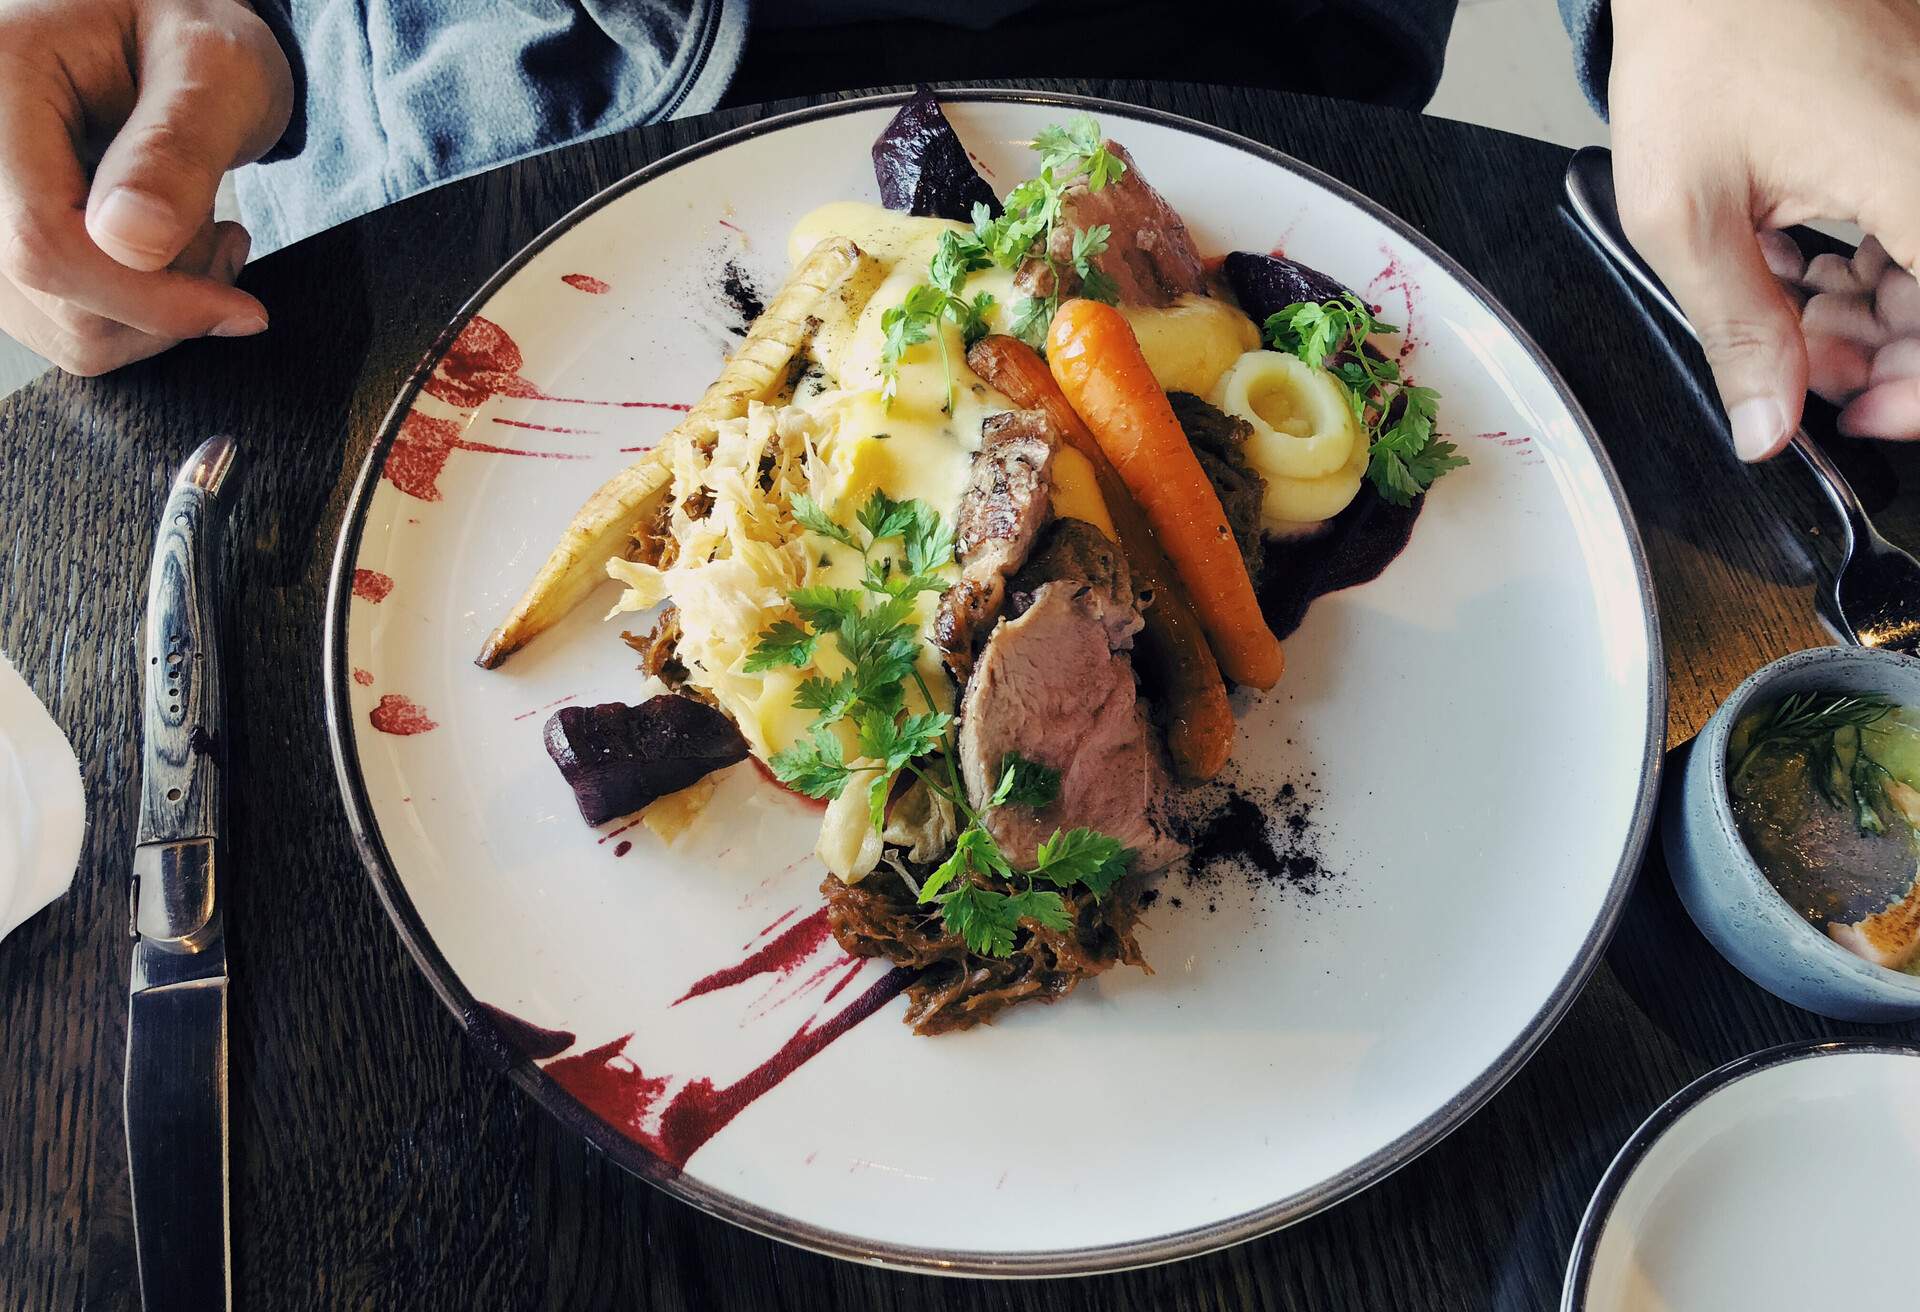 Man eating Icelandic dish: cooked lamb steak served with vegetables and mashed potatoes